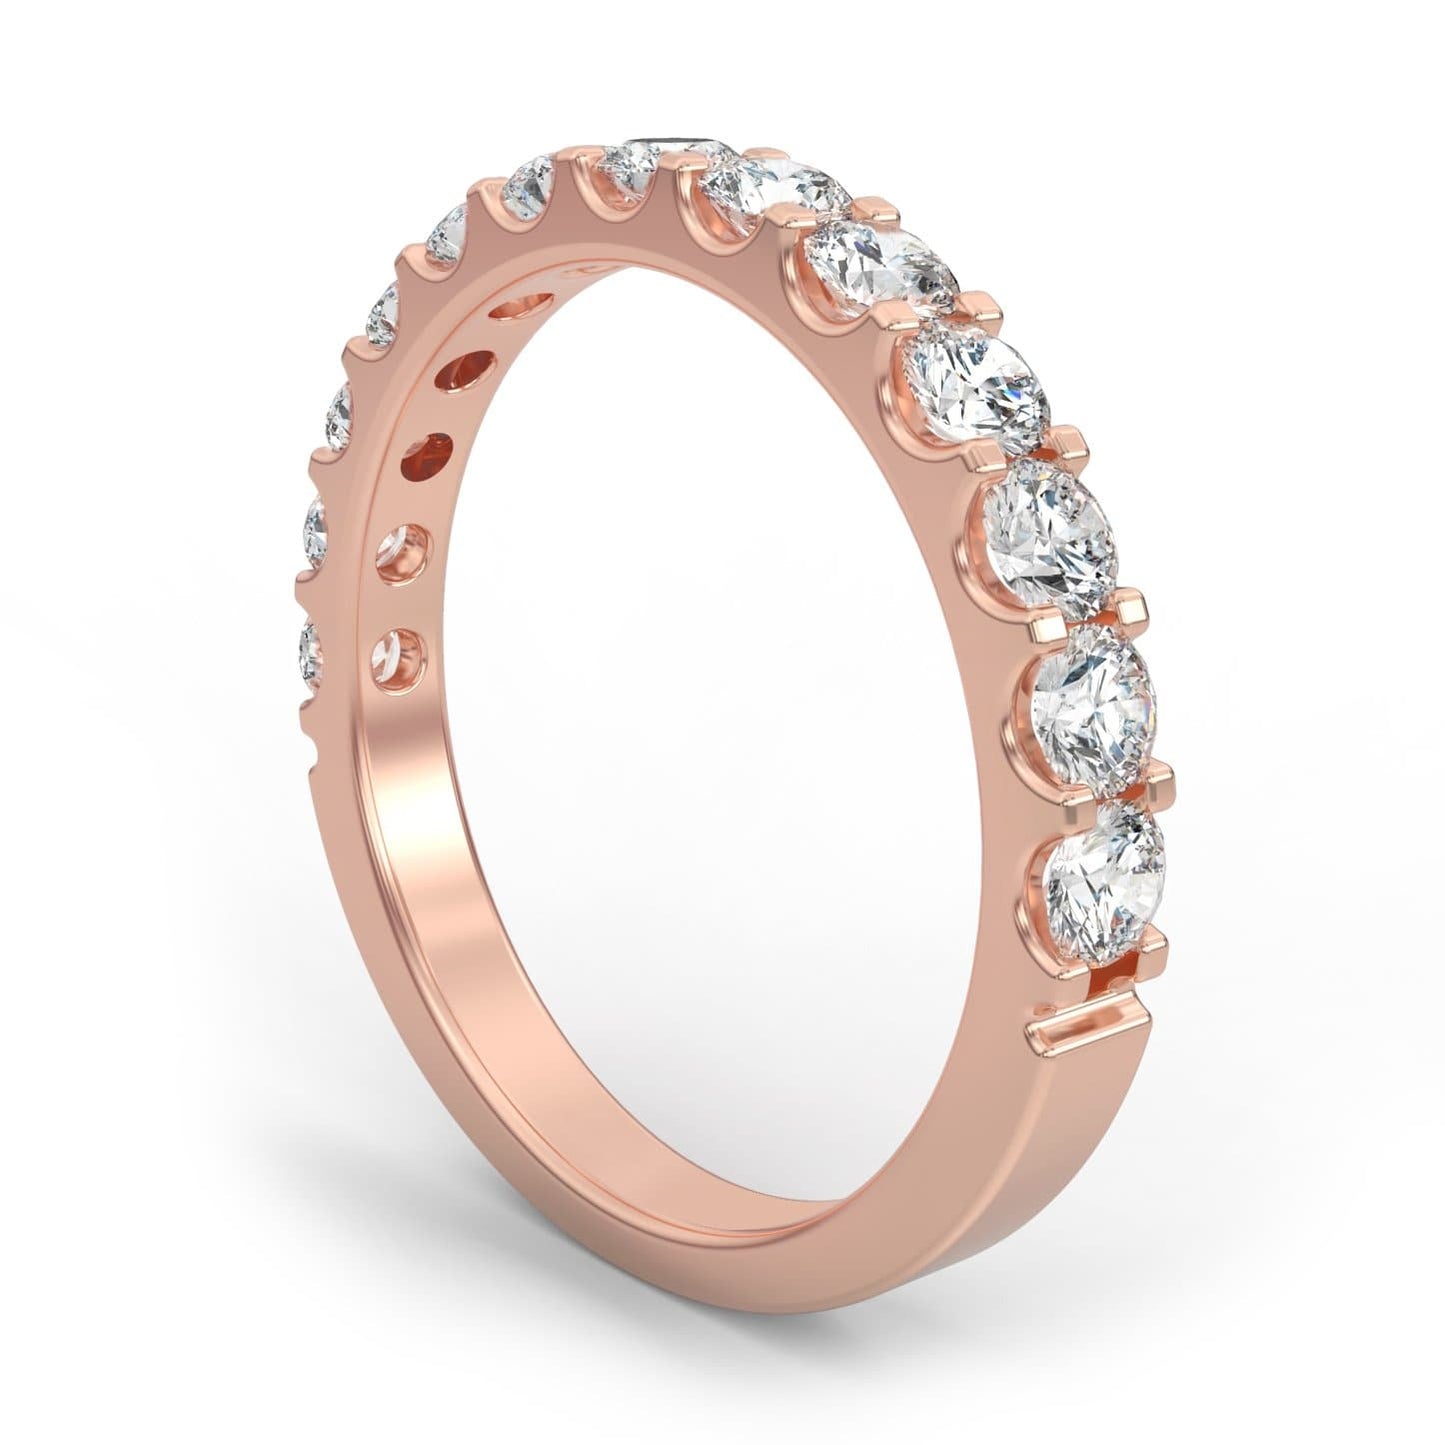 0.65ct Shared Prong Semi-Eternity Ring in 14k Gold